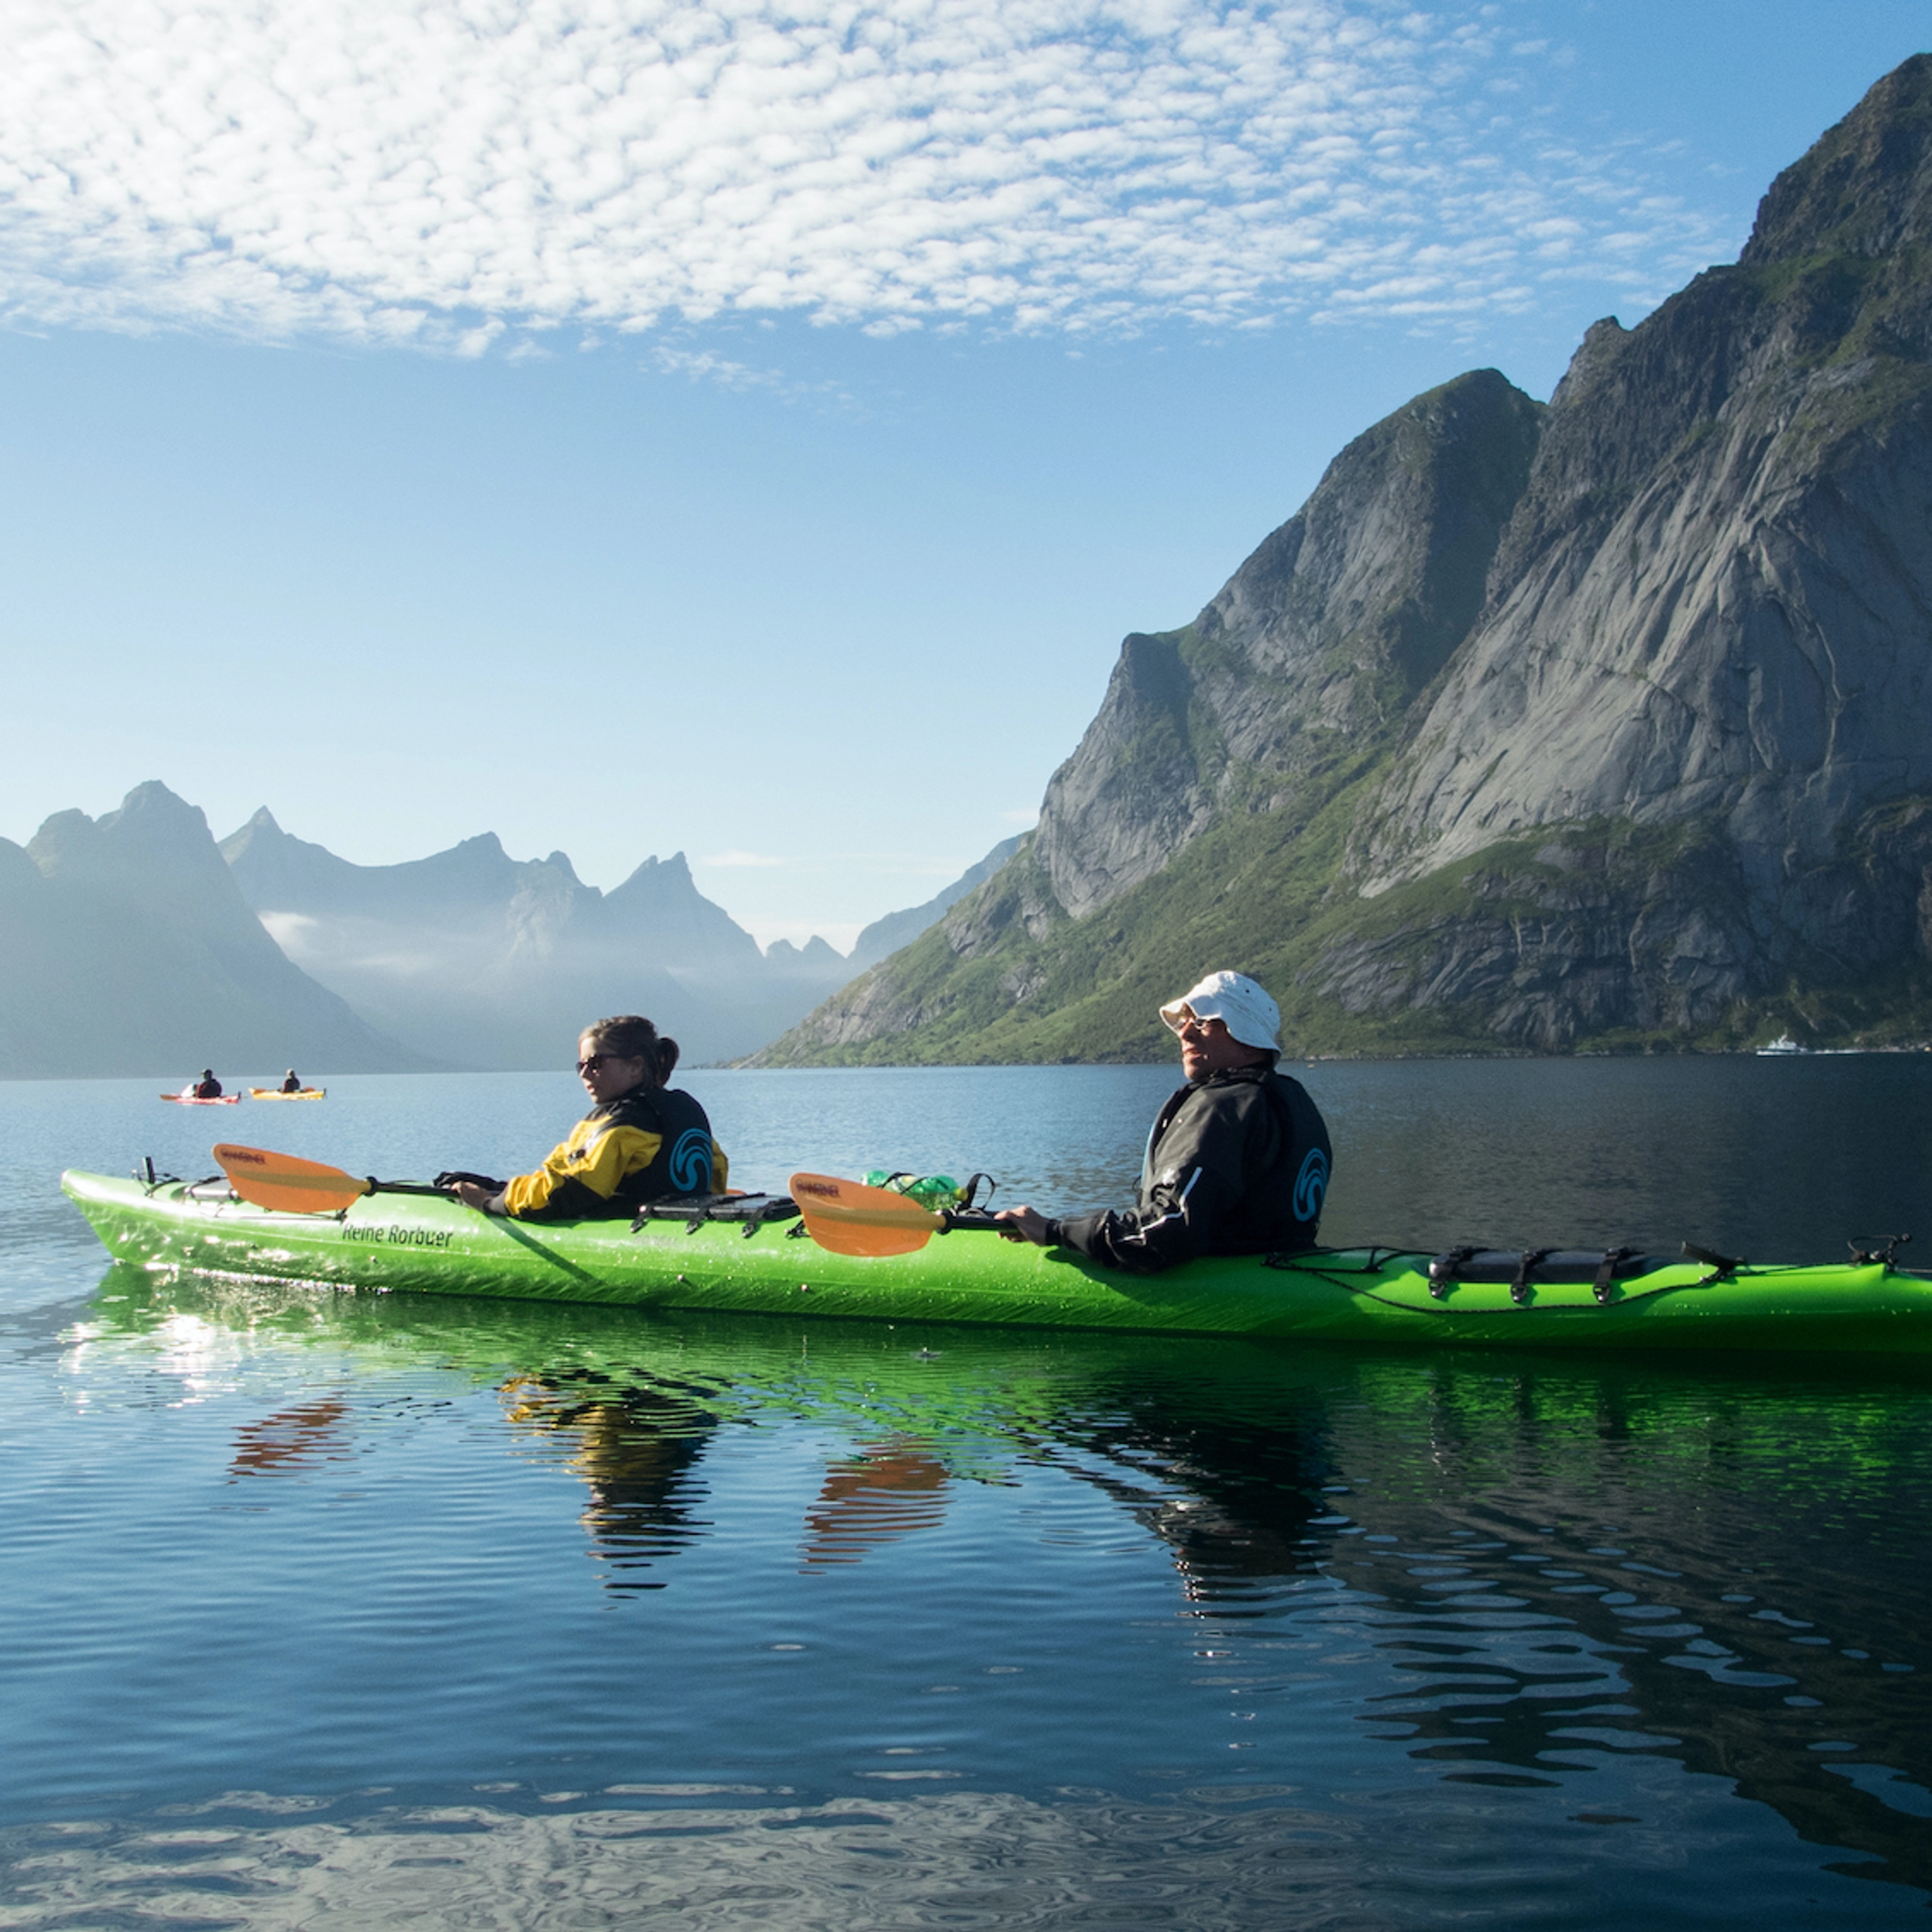 Things to do in Reine - Guided kayak trip on the Reinefjord on a sunny day, Lofoten, Norway